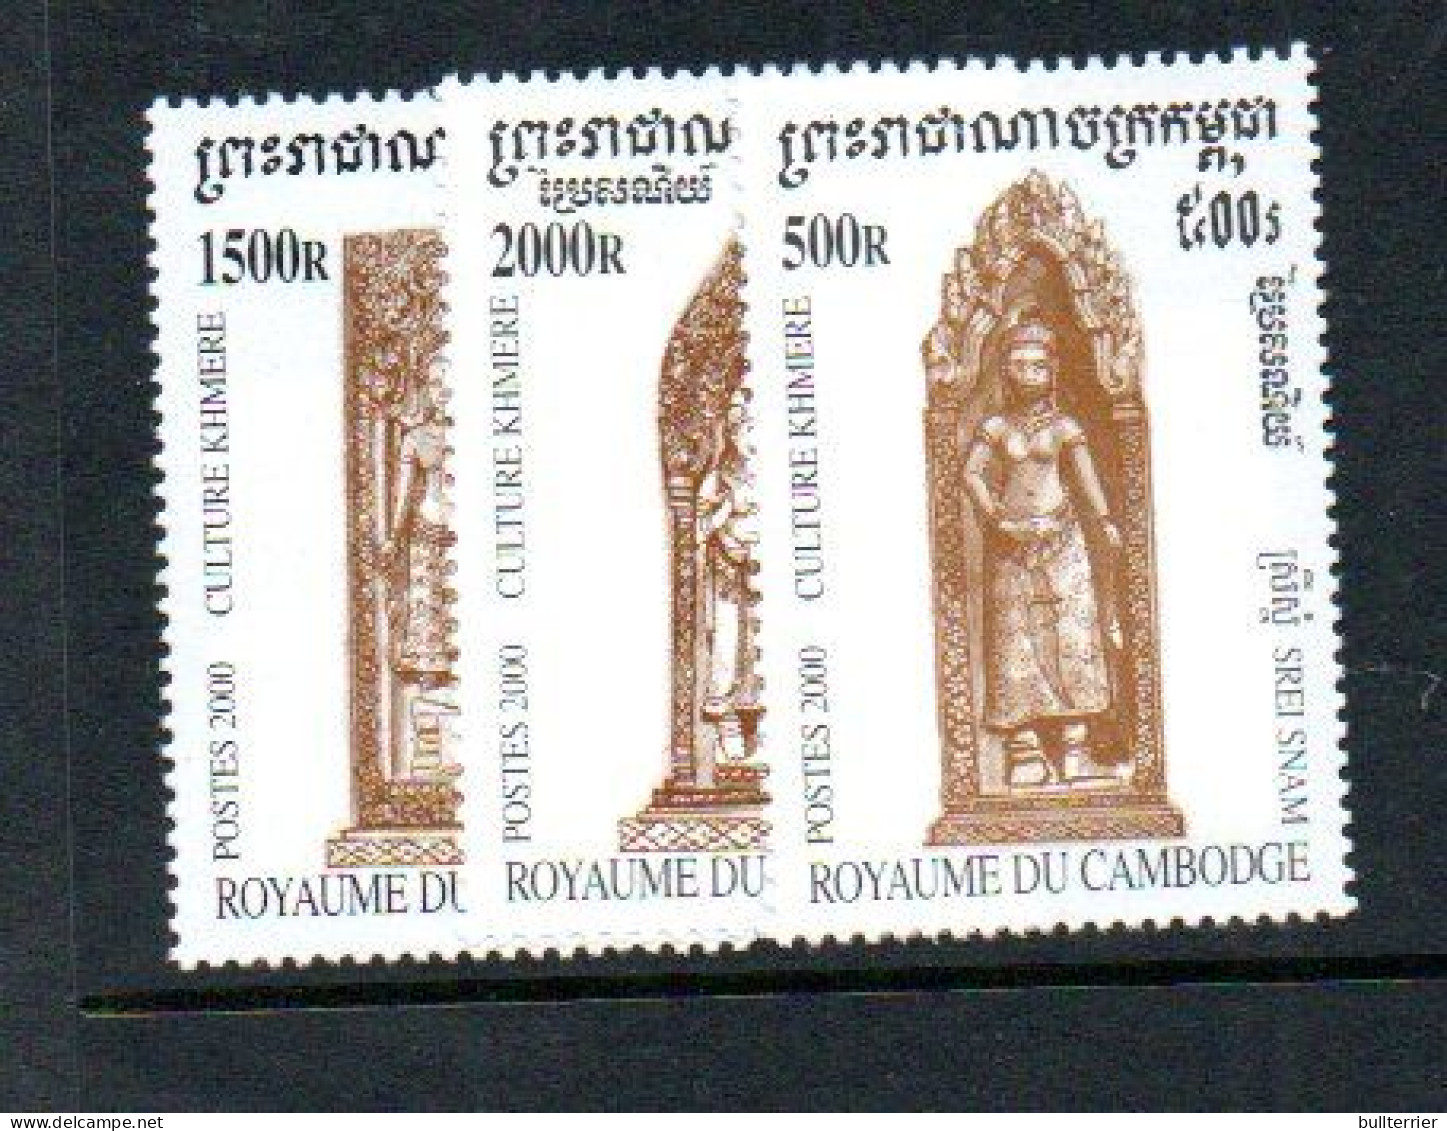 CAMBODIA - 2000  - KHMERE CULTURE ET OF 3  MINT NEVER HINGED - Cambodia